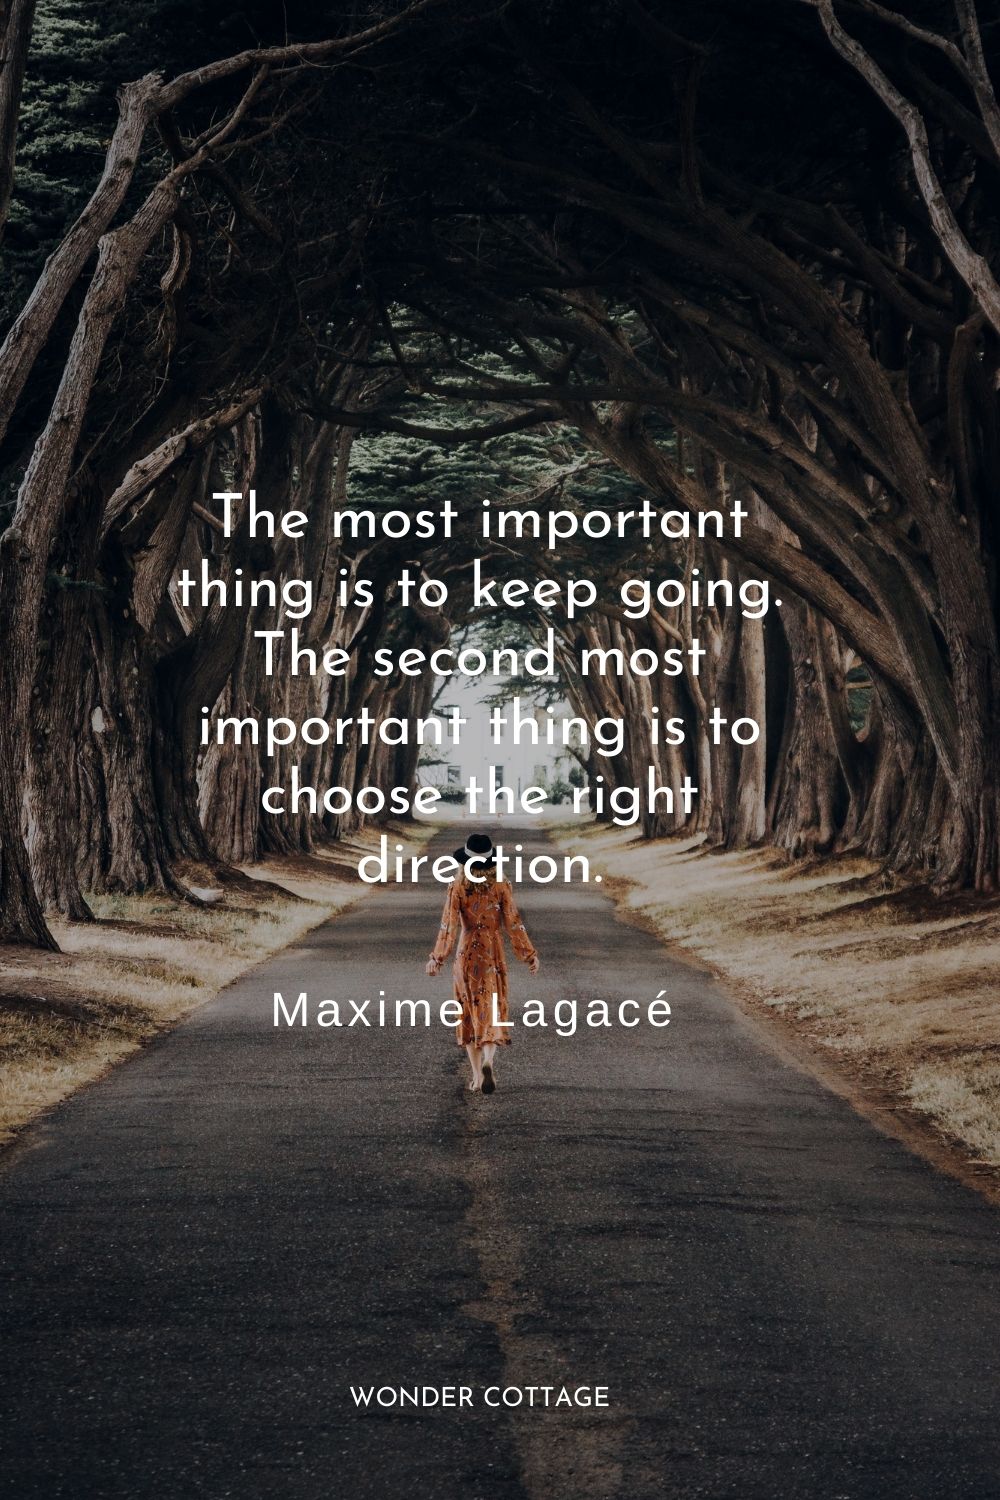 The most important thing is to keep going. The second most important thing is to choose the right direction. Maxime Lagacé